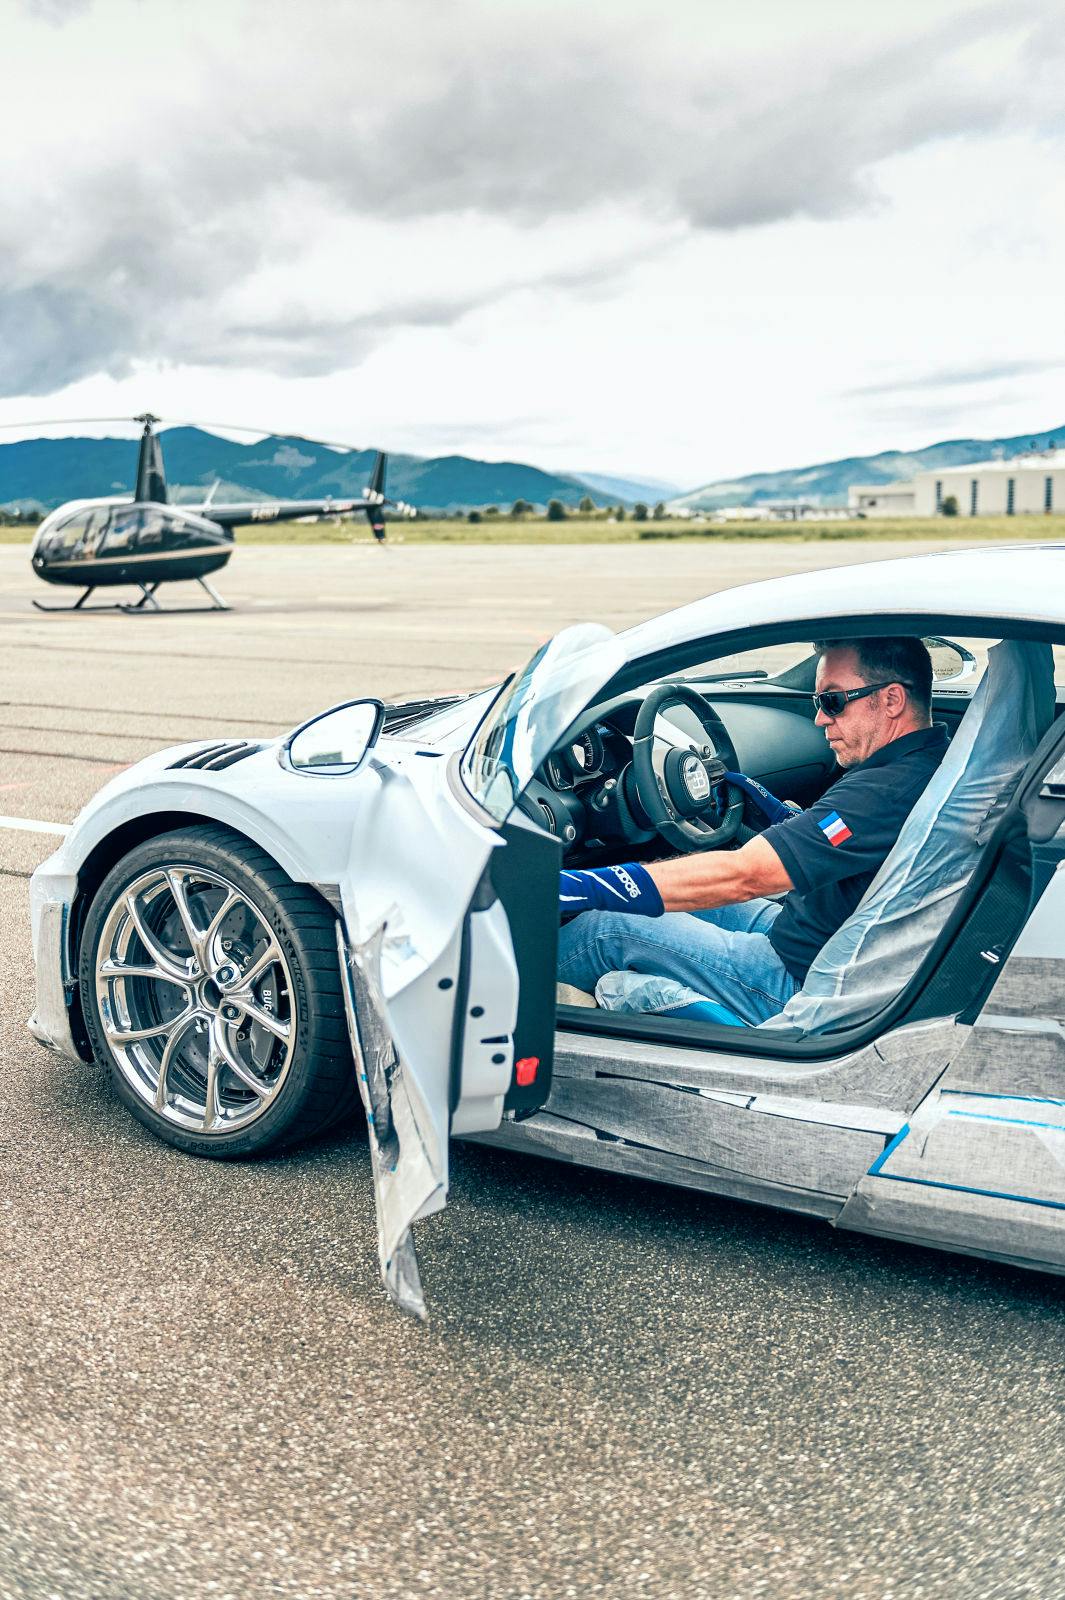 Steve Jenny, Bugatti test driver since 2004, has driven more than 350,000 km in Veyron, Chiron and Divo models.